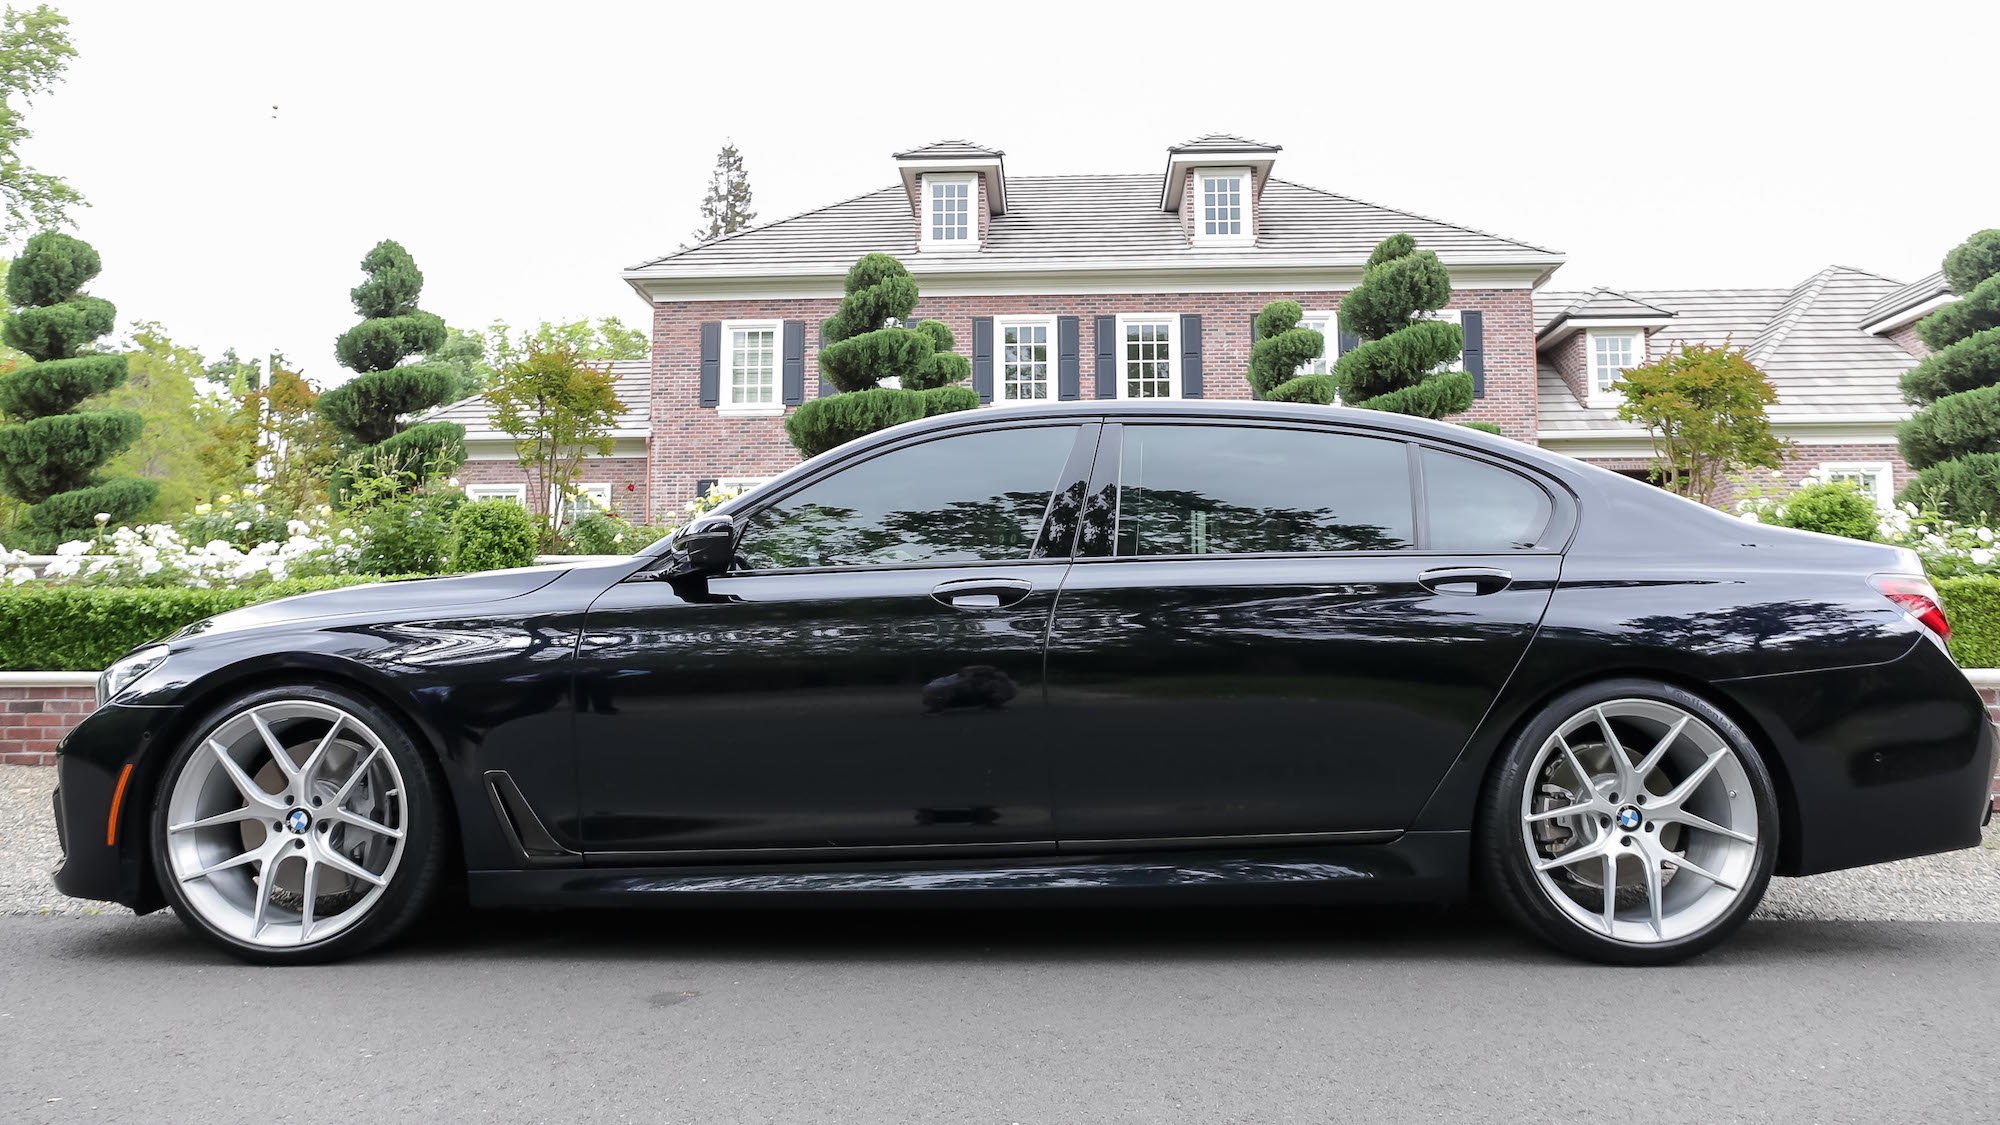 Aftermarket Side Skirts on Black BMW 7-Series - Photo by Forgeline Motorsports